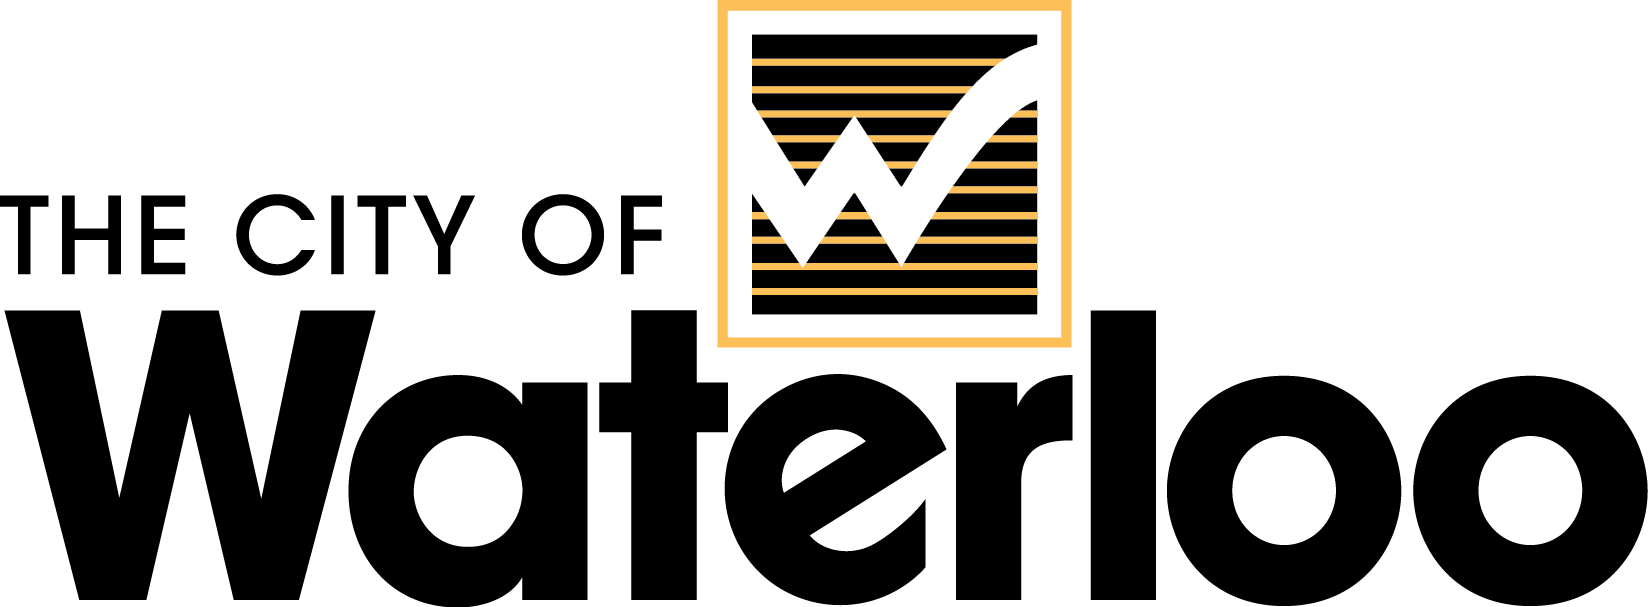 Logo Image for City of Waterloo